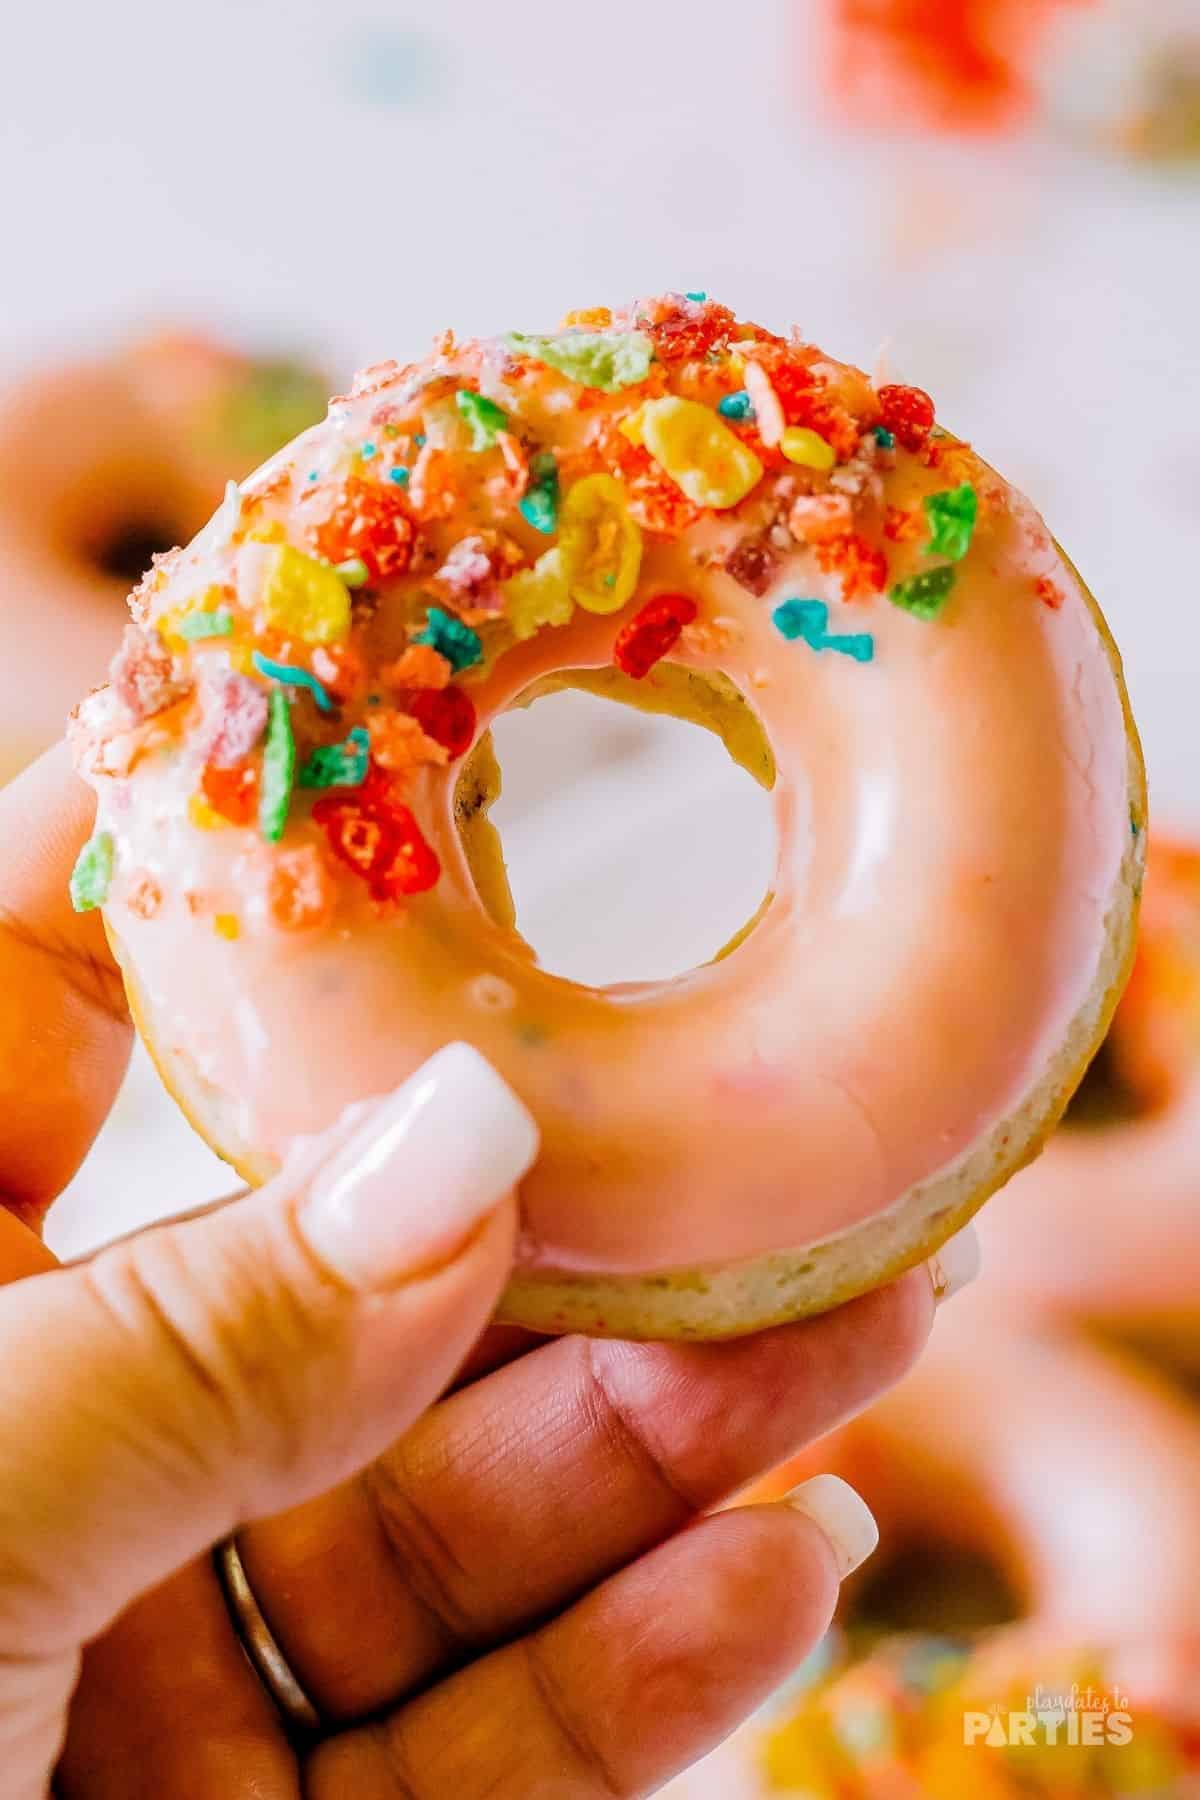 A woman's hand holding a baked donut with strawberry glaze and colorful cereal.